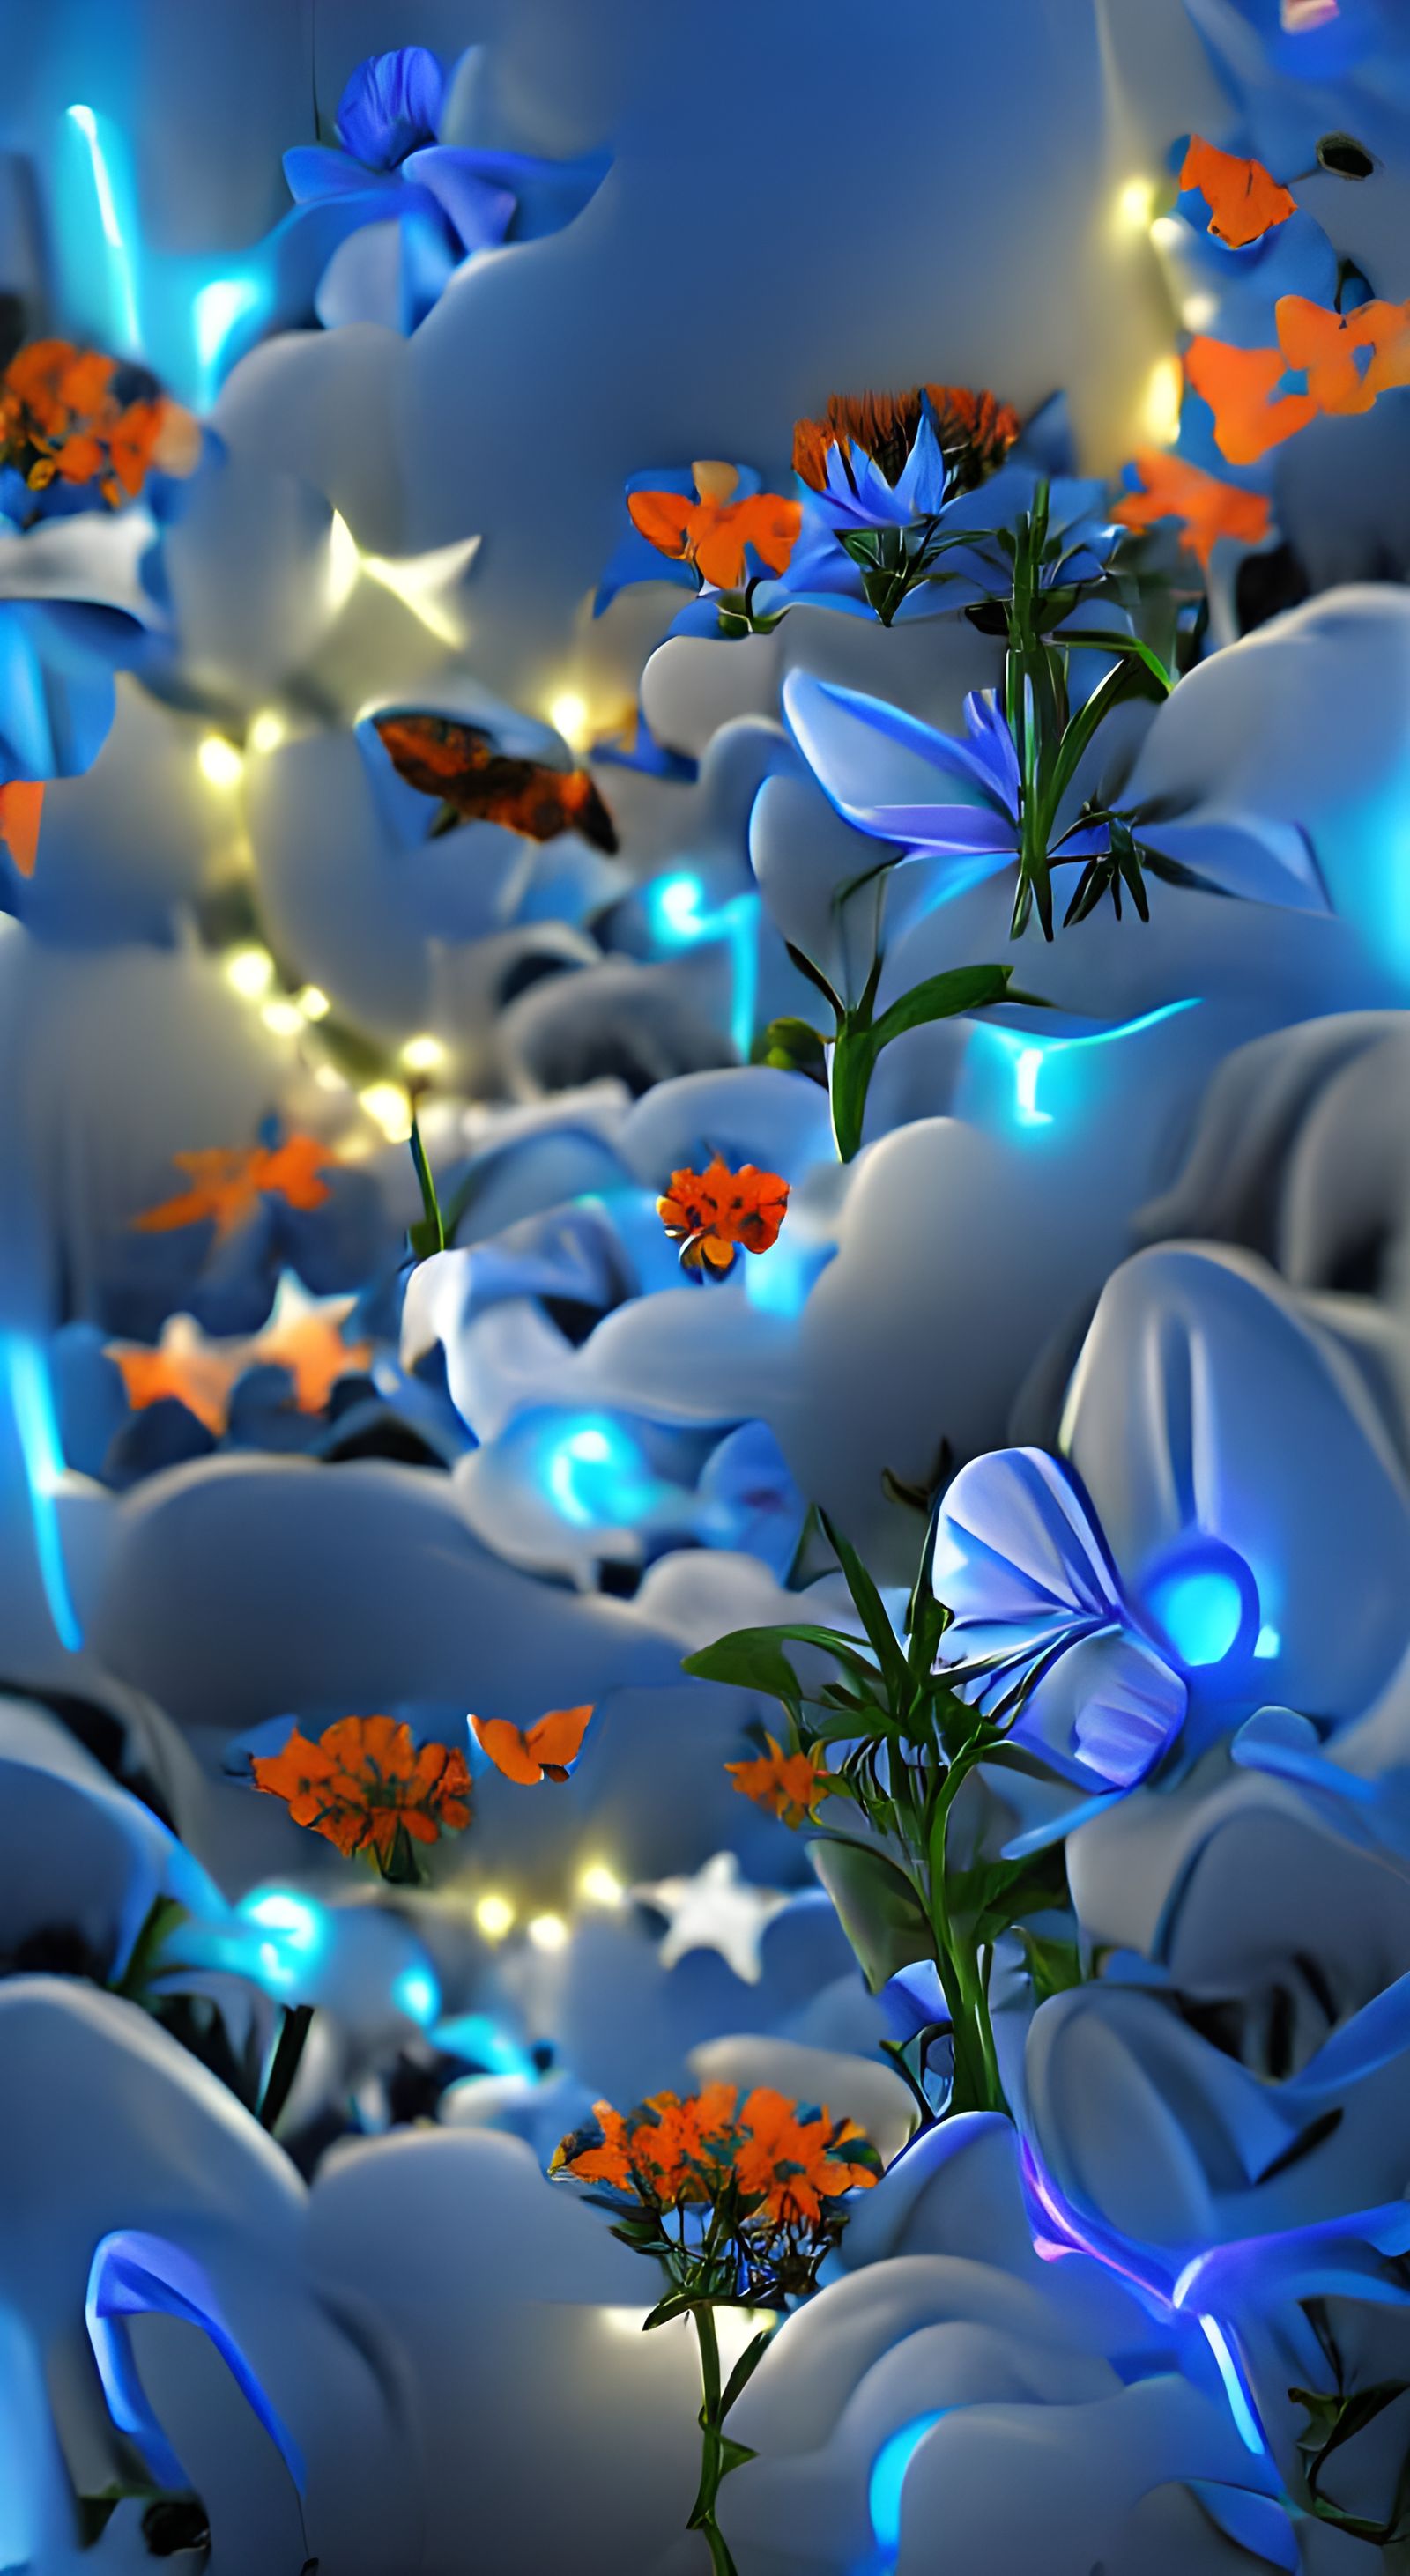 Blue Flowers in the stars and clouds starlight ambient occlusion digital illustration deviantart DSLR HDR glowing neon p...